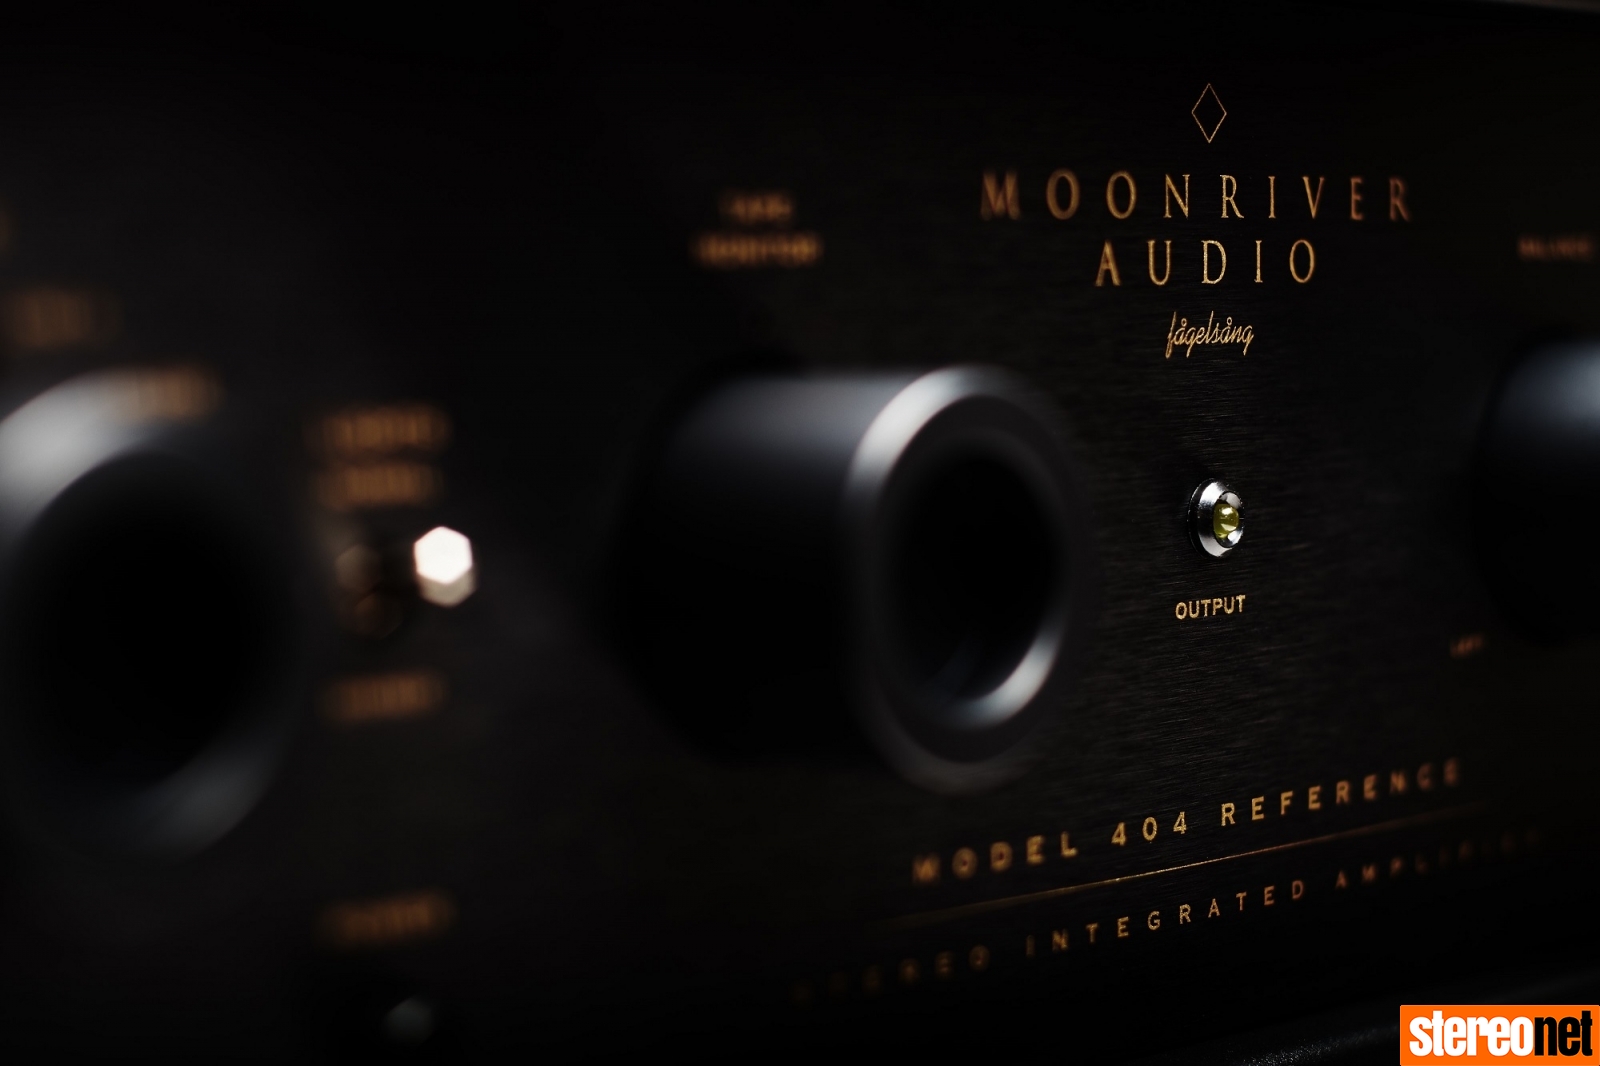 Moonriver 404 Reference Review